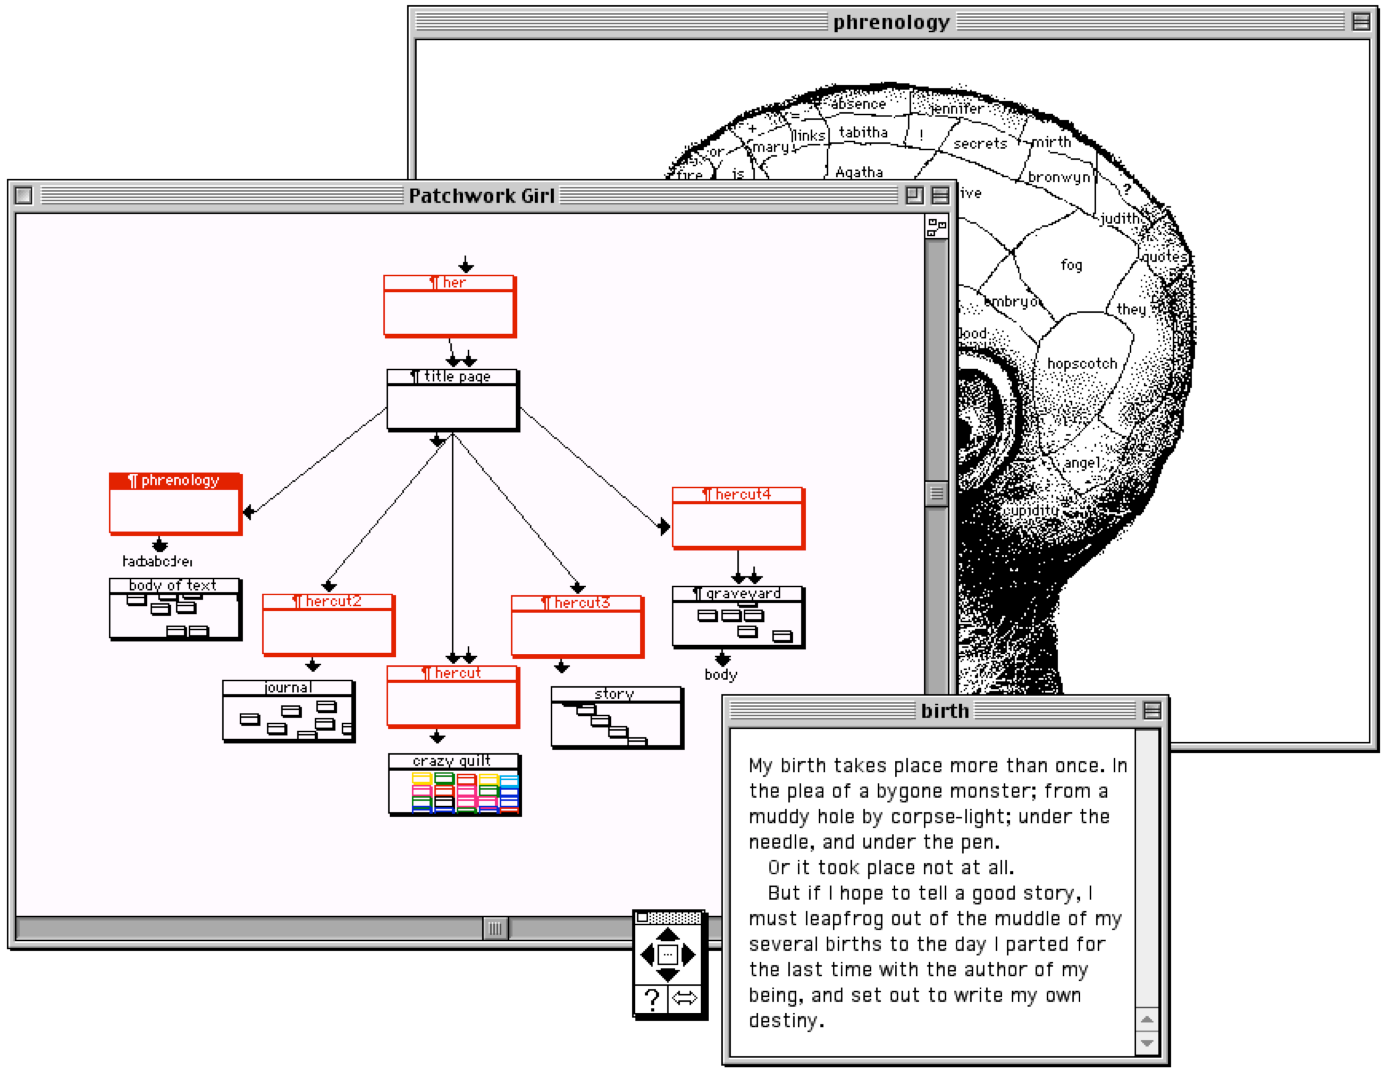 Three Mac Classic windows. One is labeled "phrenology" and contains a black-and-white image of a human head with labelled sections. The second is labelled "Patchwork Girl" and shows an interlinked map of colored nodes. The third is labelled "birth" and features a passage of text beginning "My birth takes place more than once."